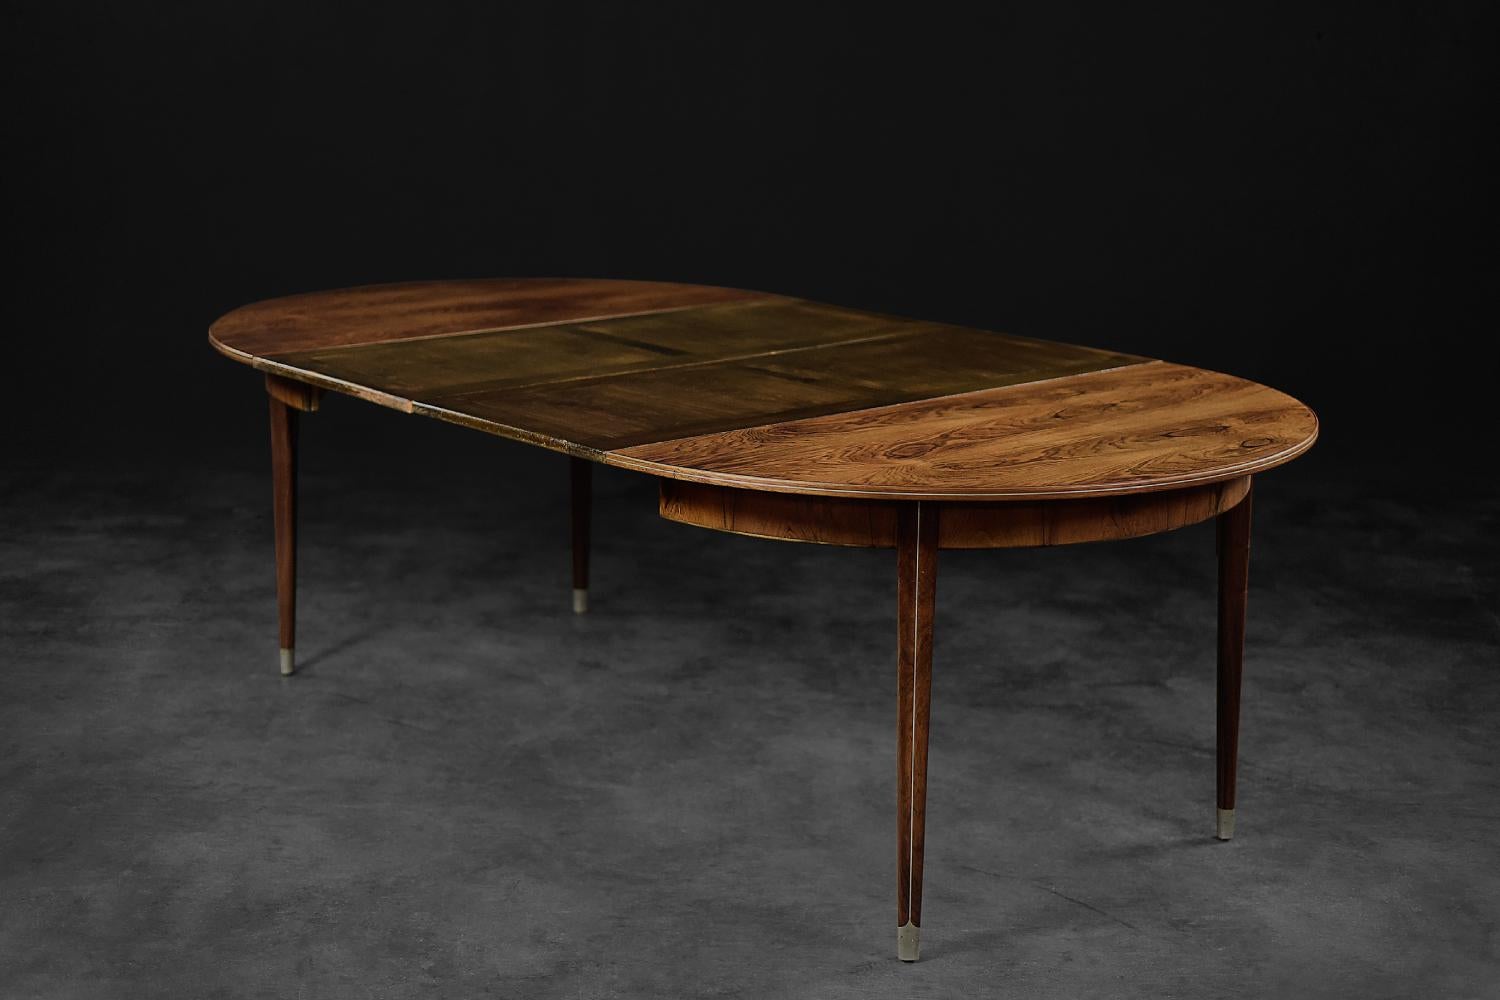 Vintage Rare Danish Round Rosewood Folding Dining Table by Agner Christoffersen For Sale 5